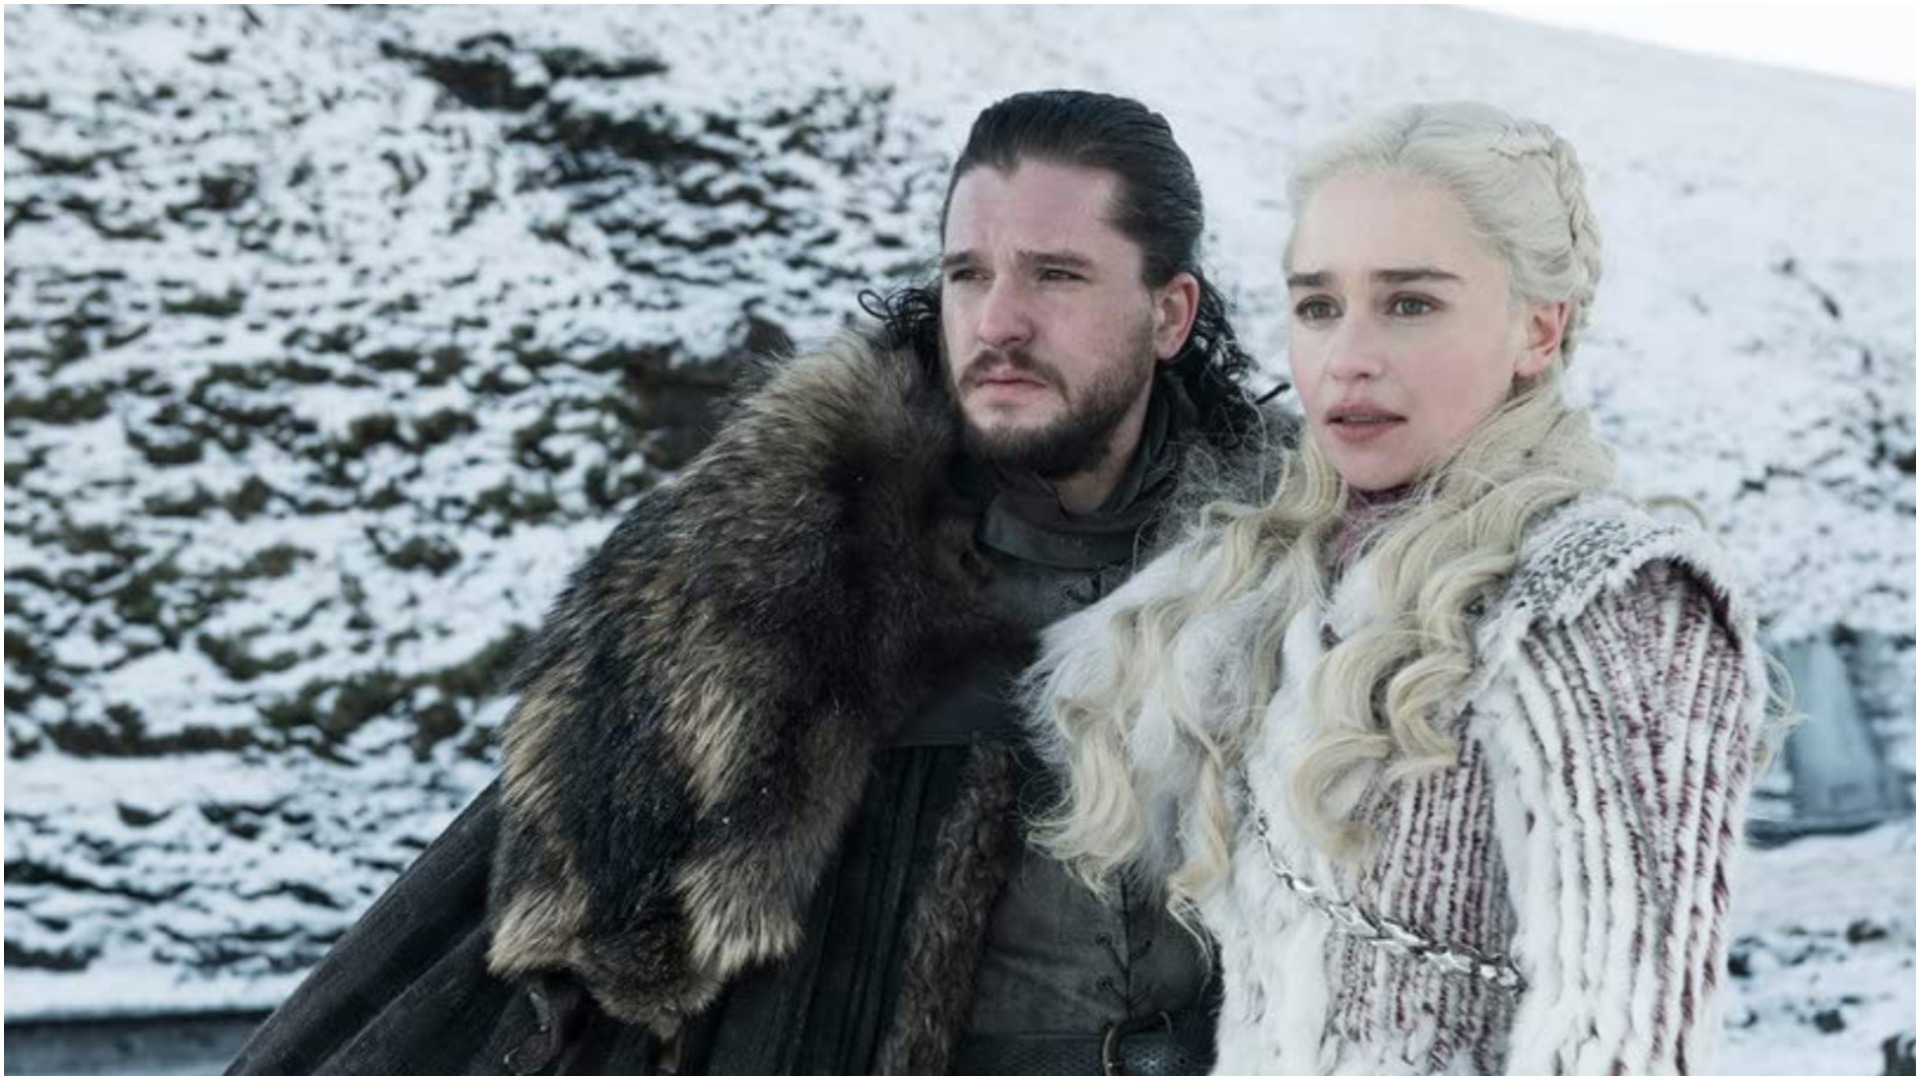 Jon Snow Returns? Exciting New Details on the 'Game of Thrones' Spinoff Everyone's Talking About!